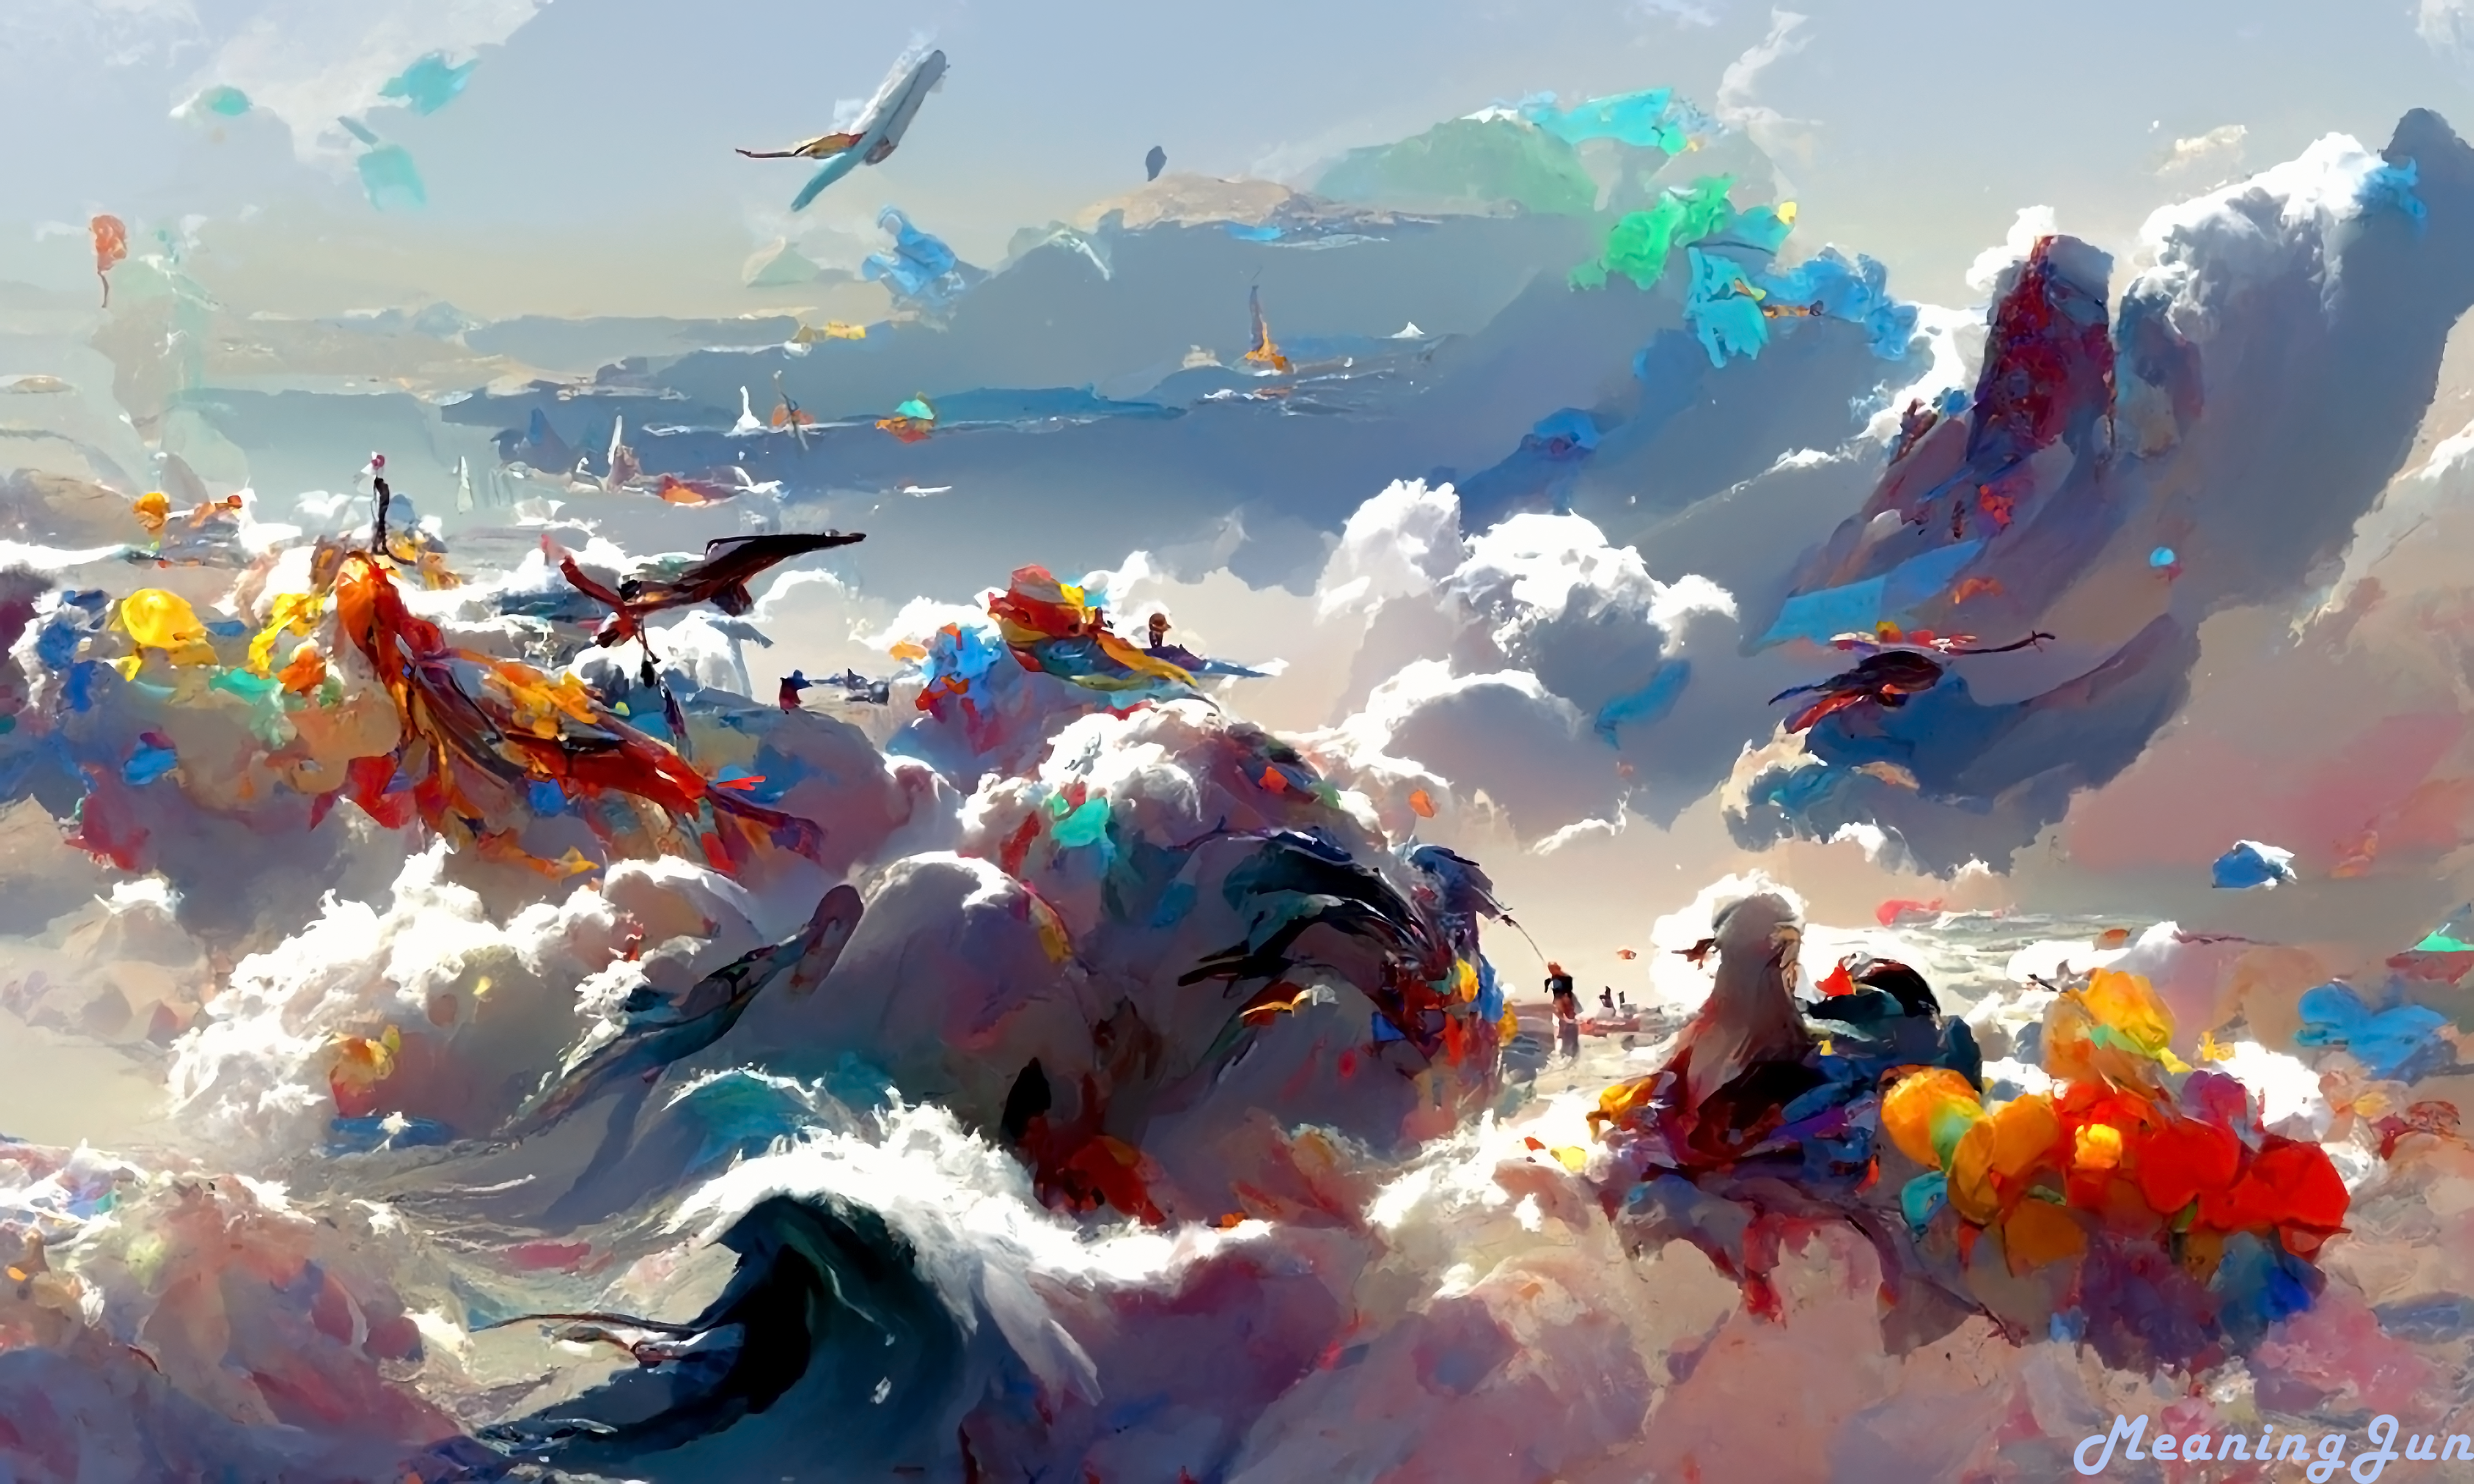 Free AI art images of cool wallpapers